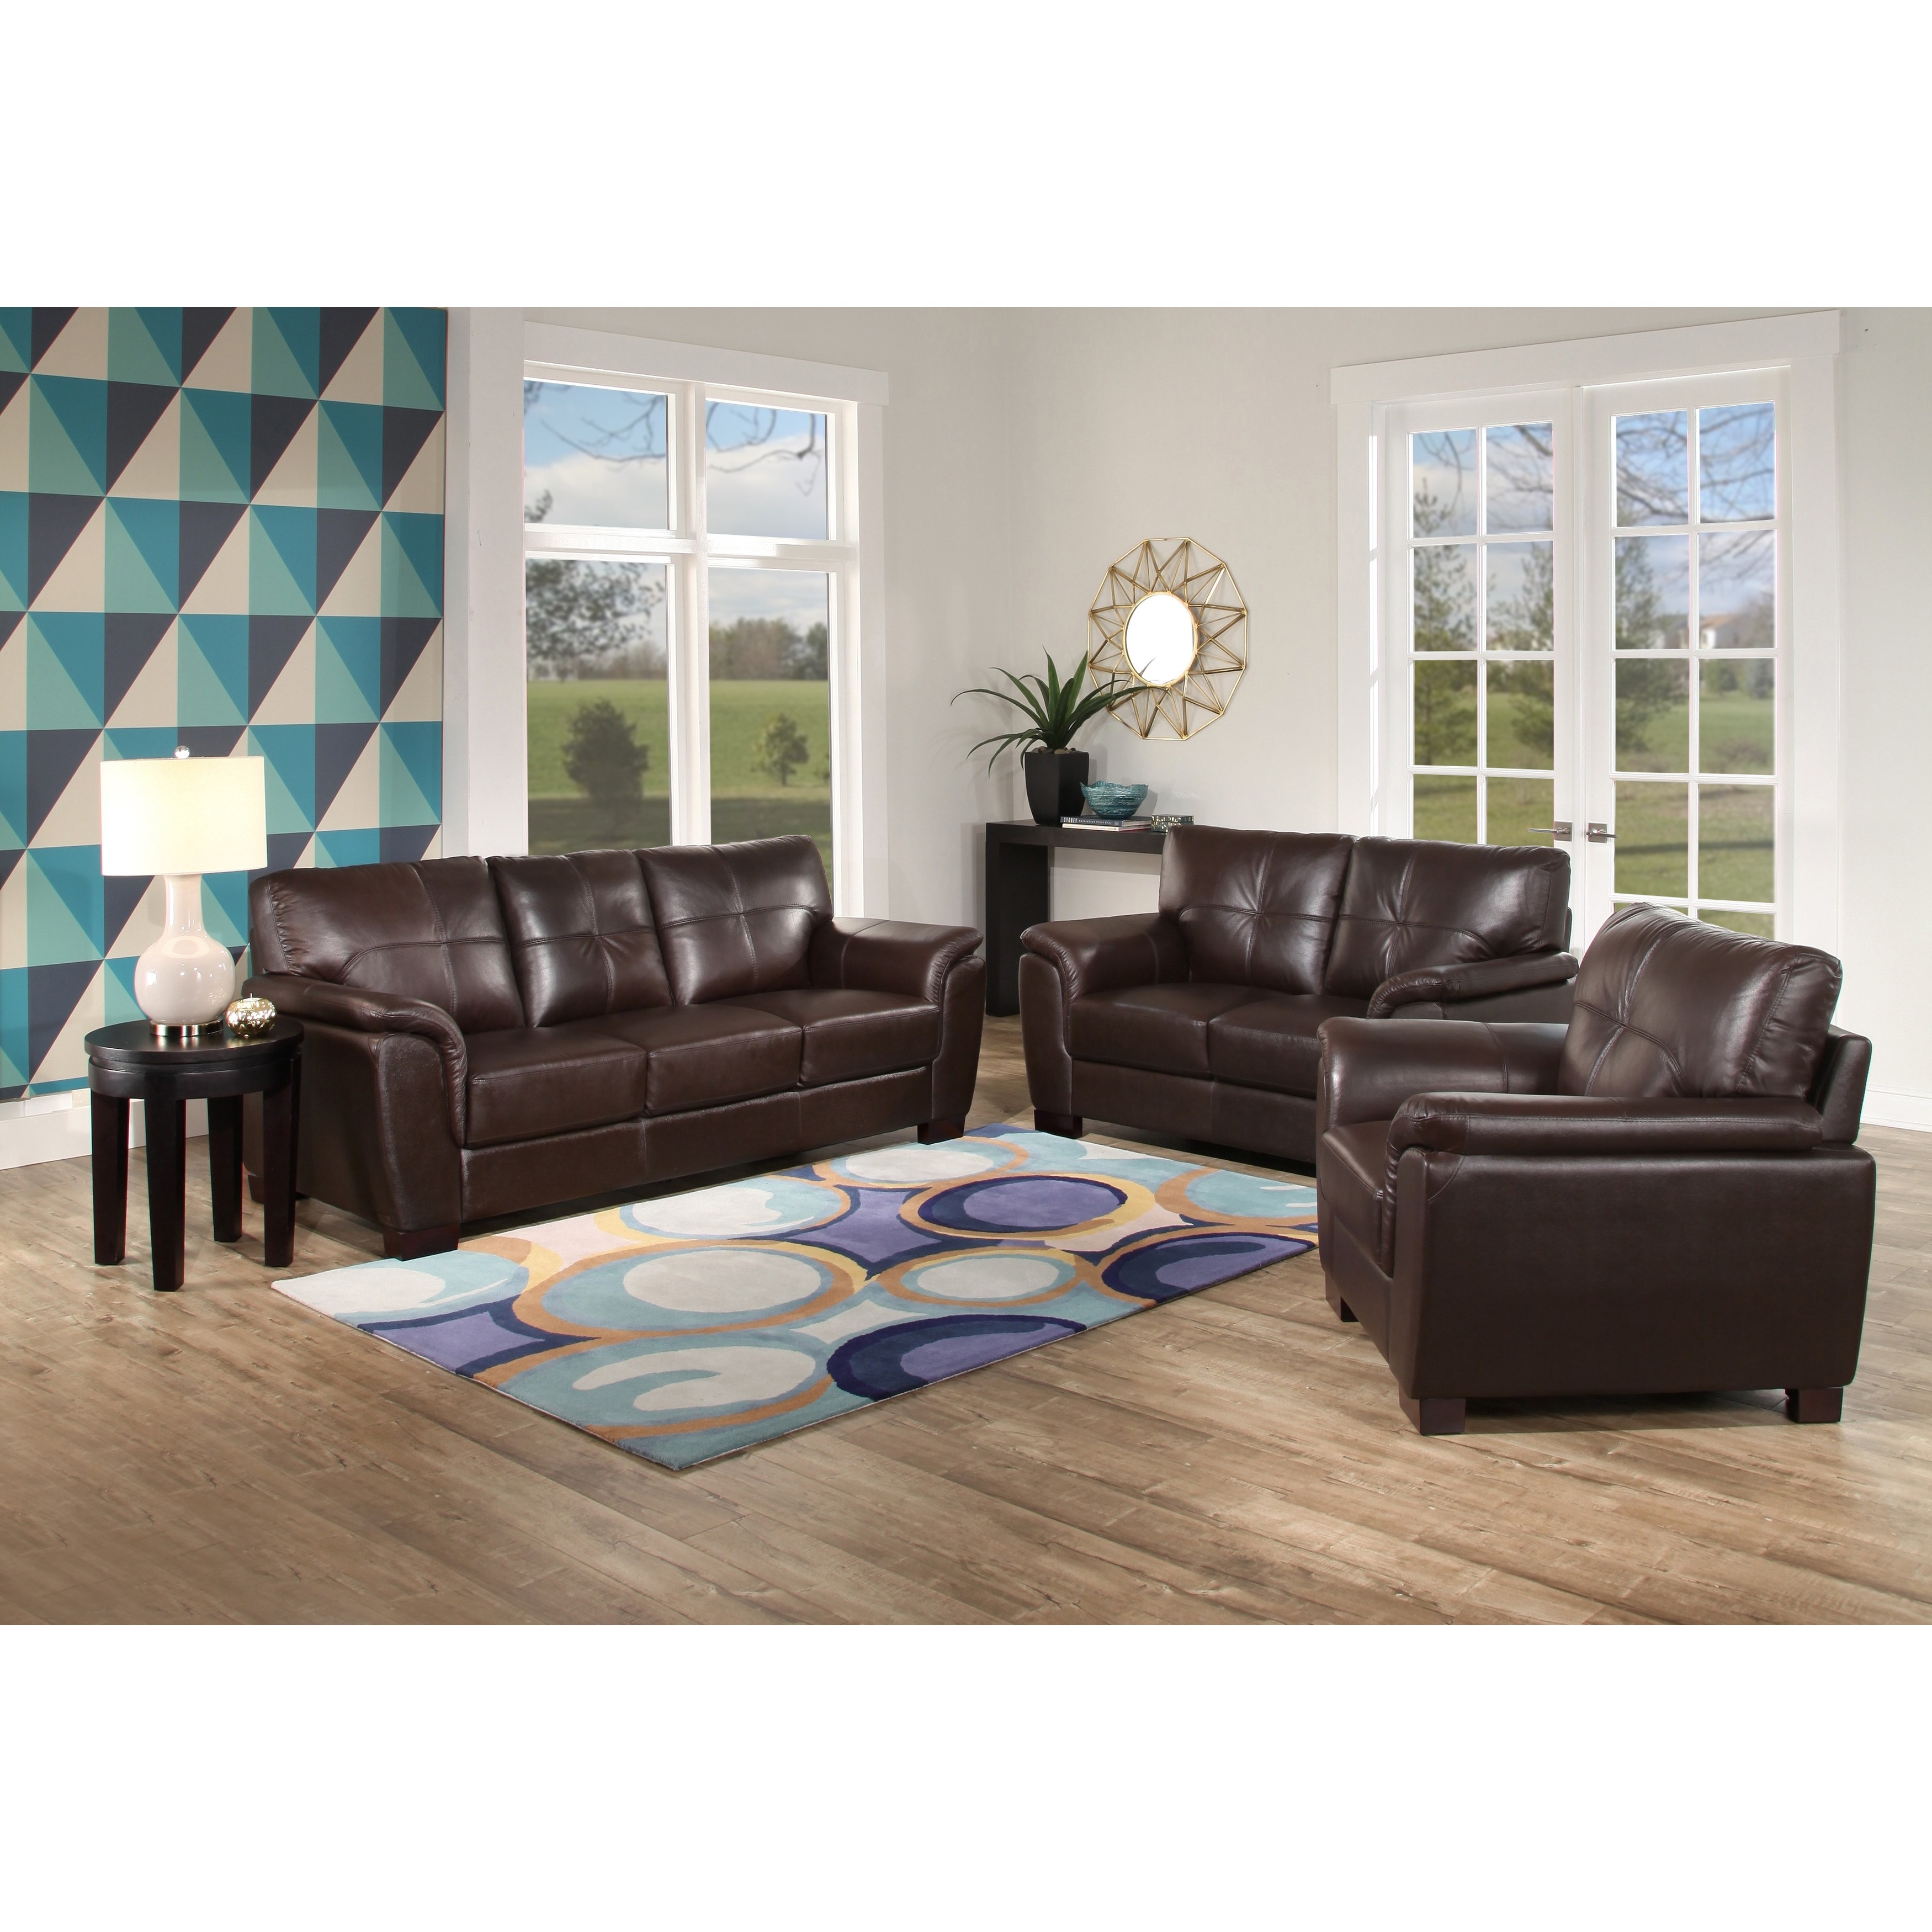 Copper Grove Bleckede 3 Piece Brown Leather Living Room Set On Sale Overstock 23122896